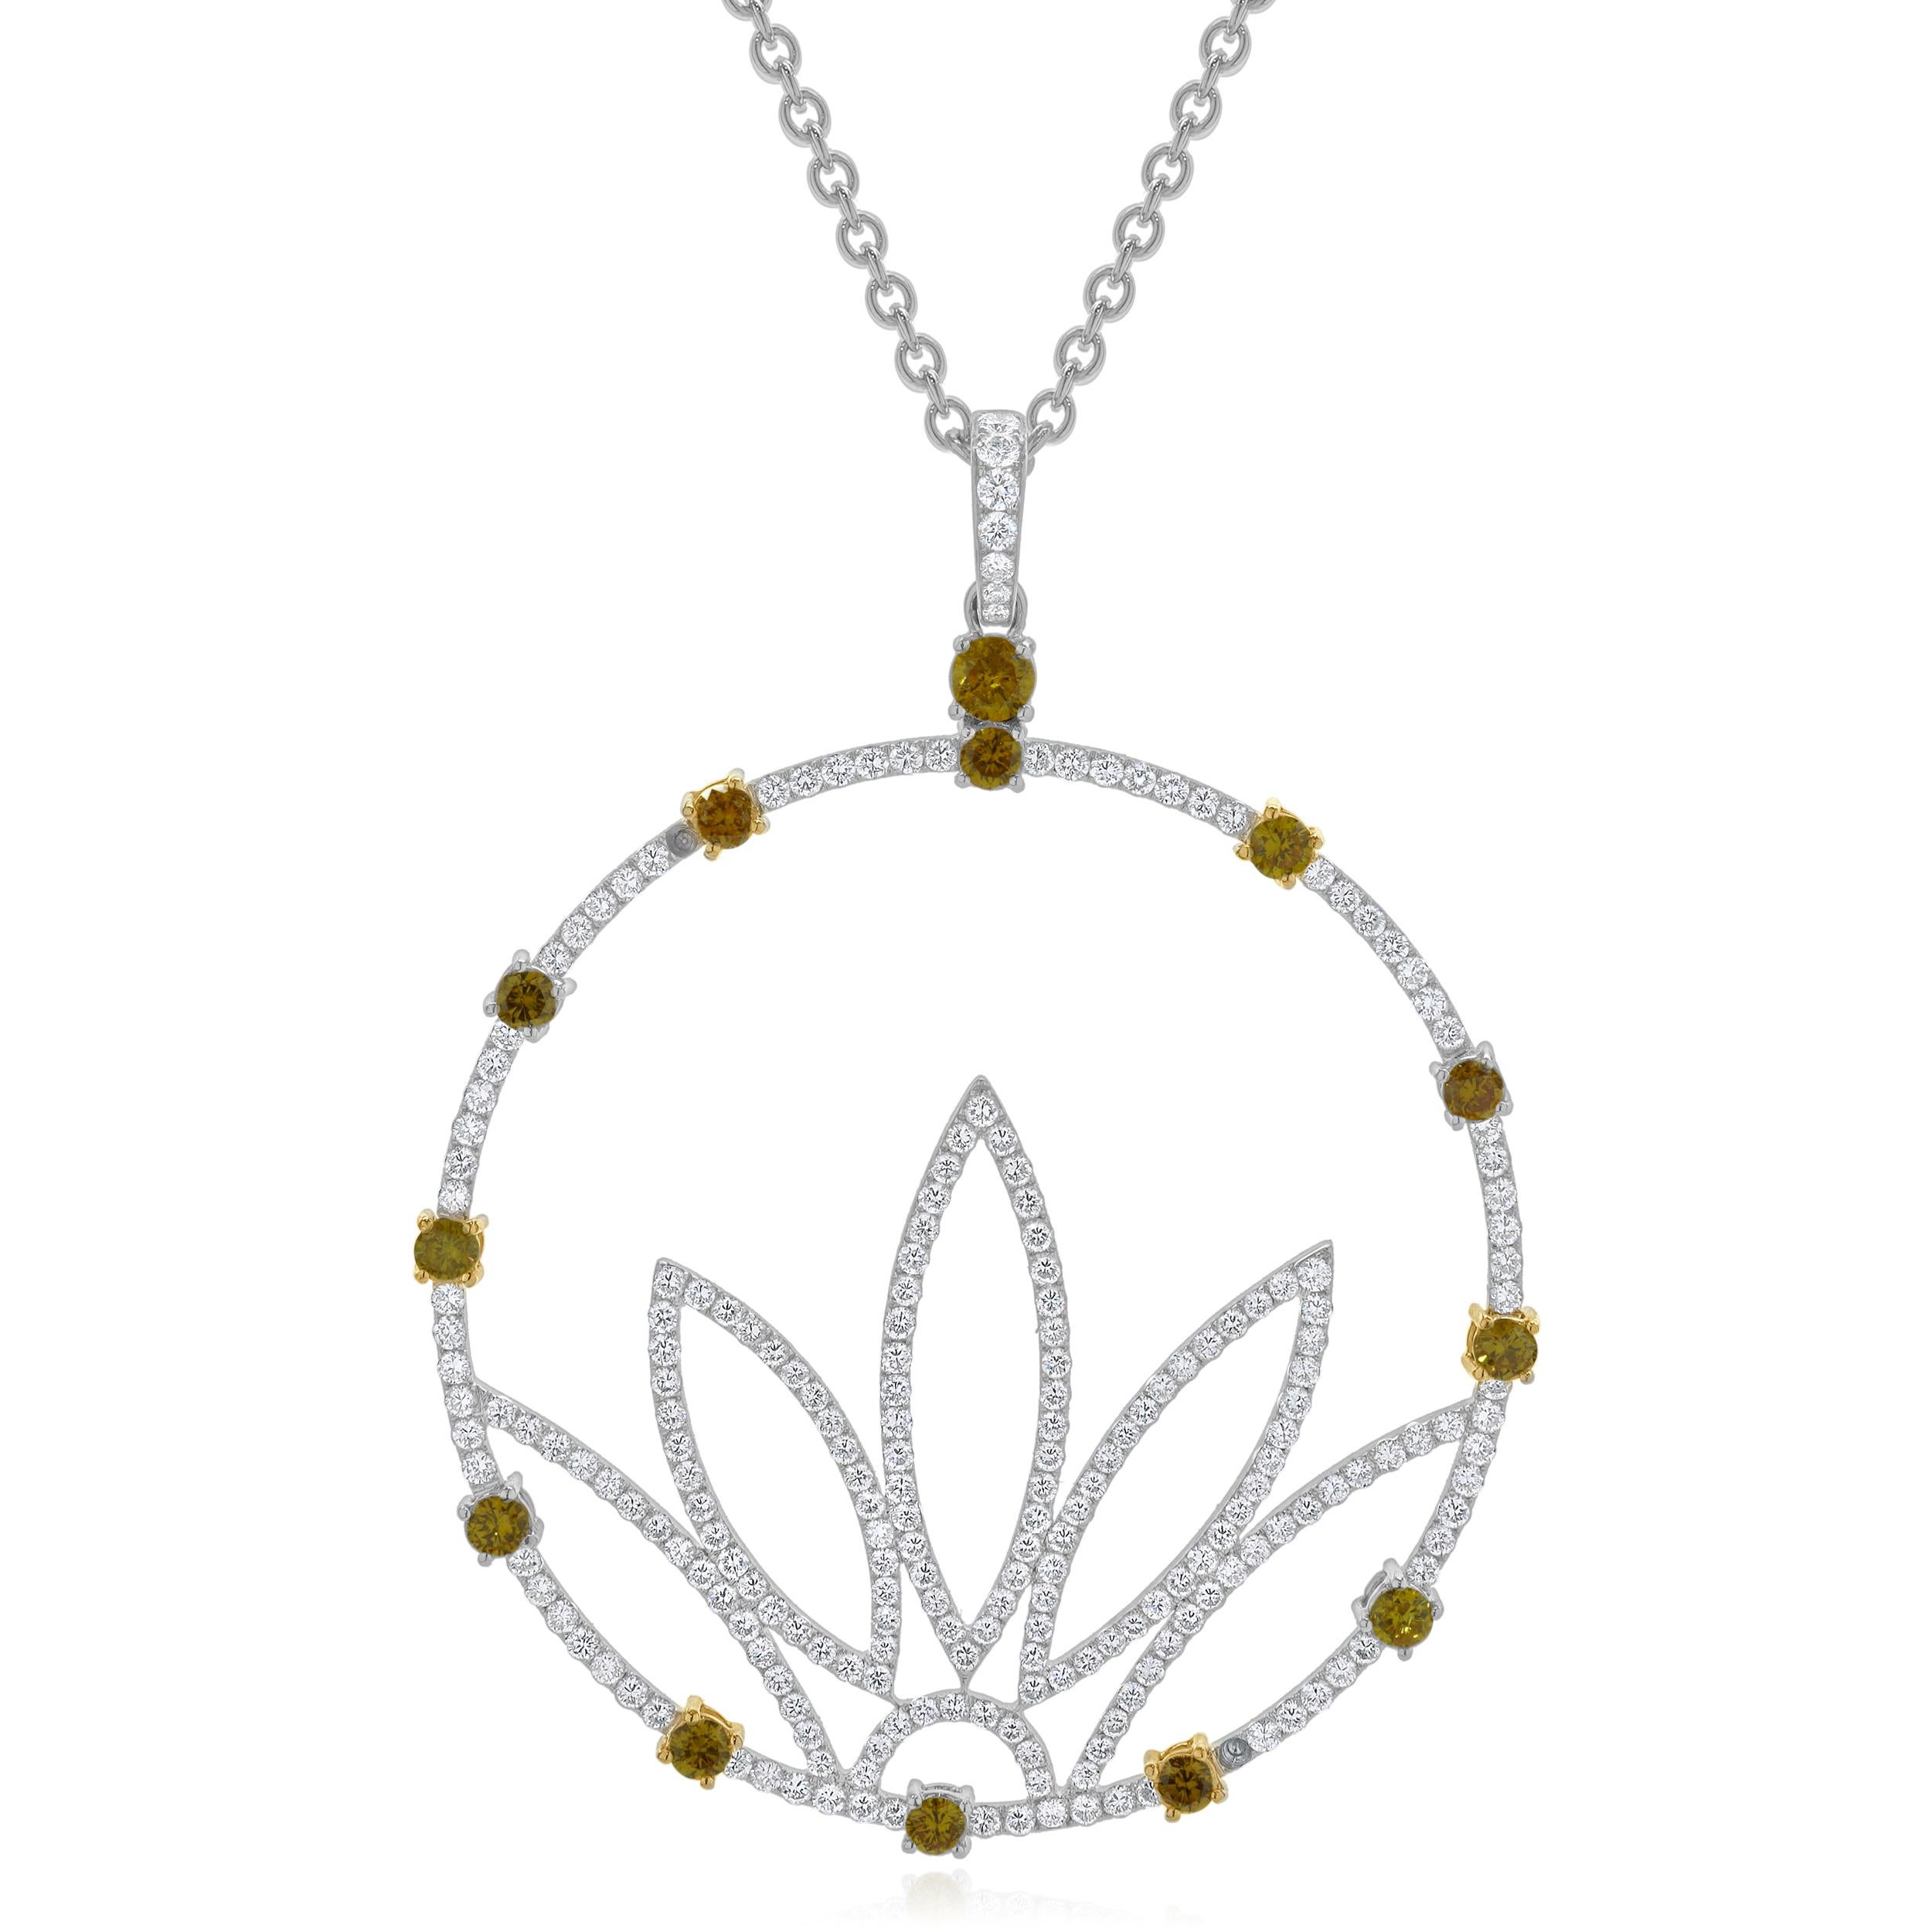 Designer: custom
Material: 18K white and yellow gold
Diamonds: 226 round brilliant cut = 3.13cttw
Color: G
Clarity: VS2
Diamonds: 13 round brilliant cut = 1.02cttw
Color: Fancy Yellow
Clarity: SI1
Dimensions: necklace measures 16-inches in length